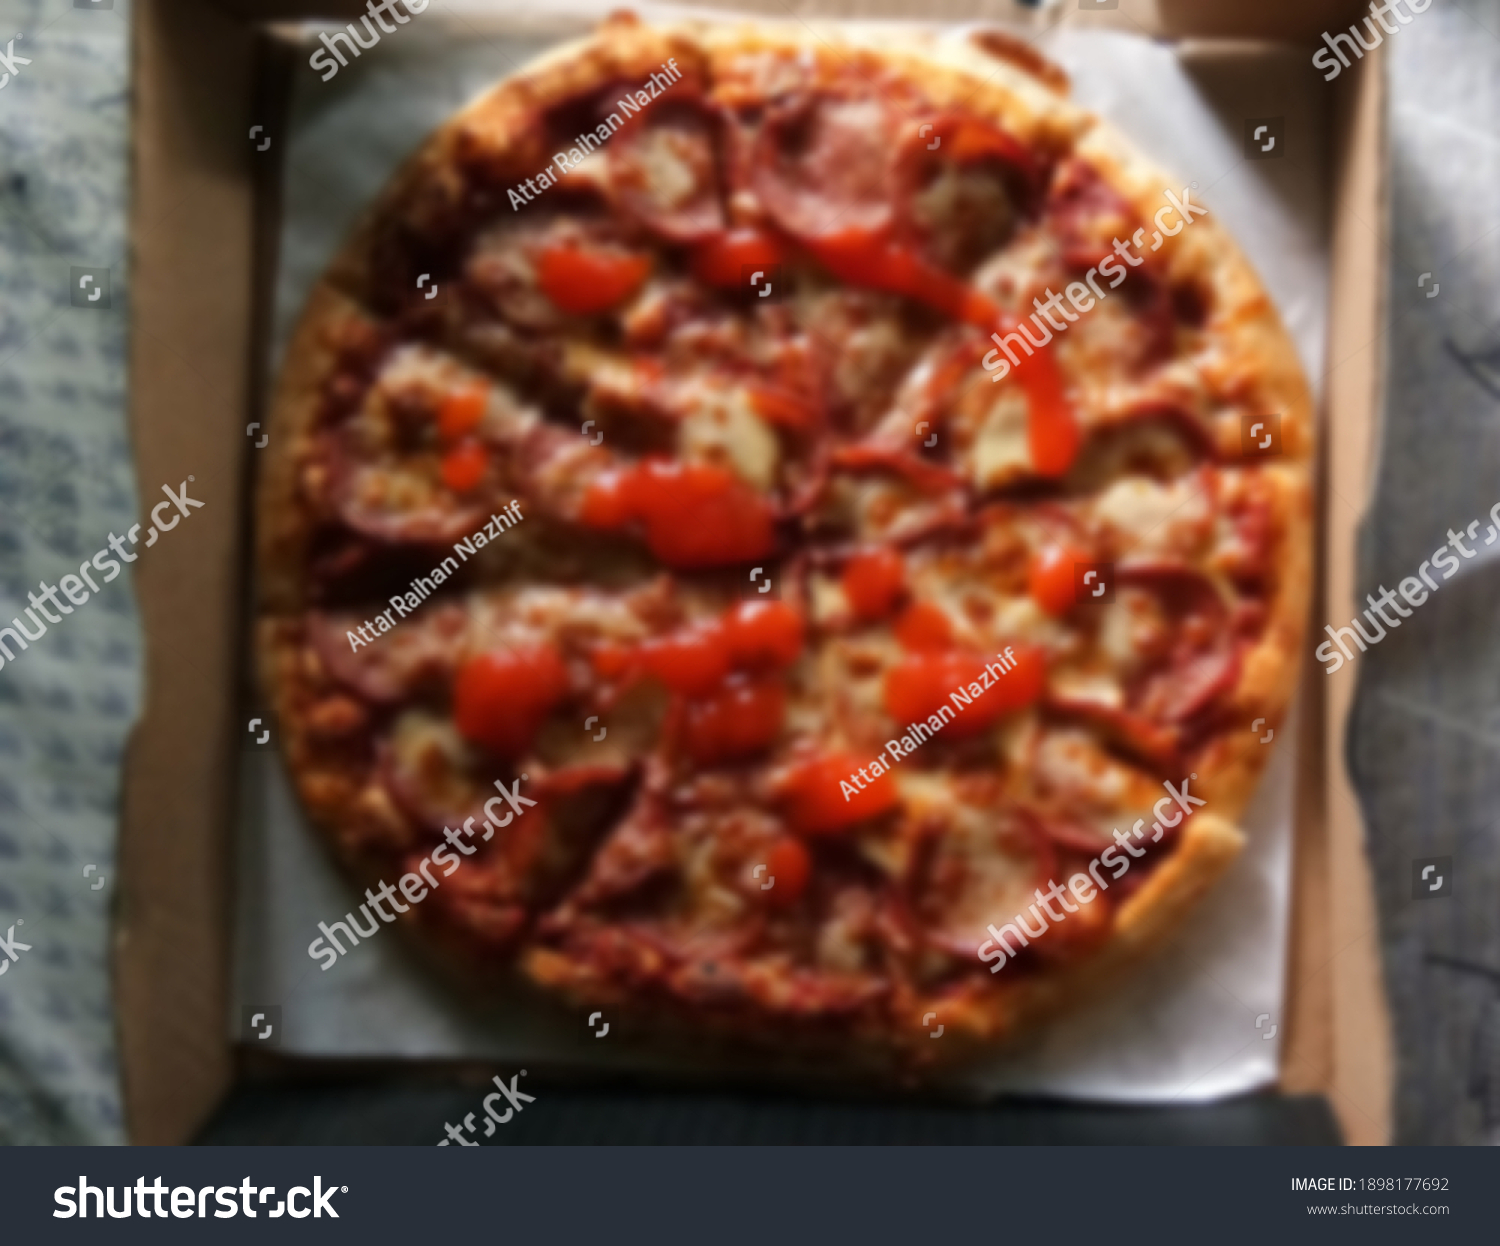 A blurred image of a pepperoni pizza #1898177692